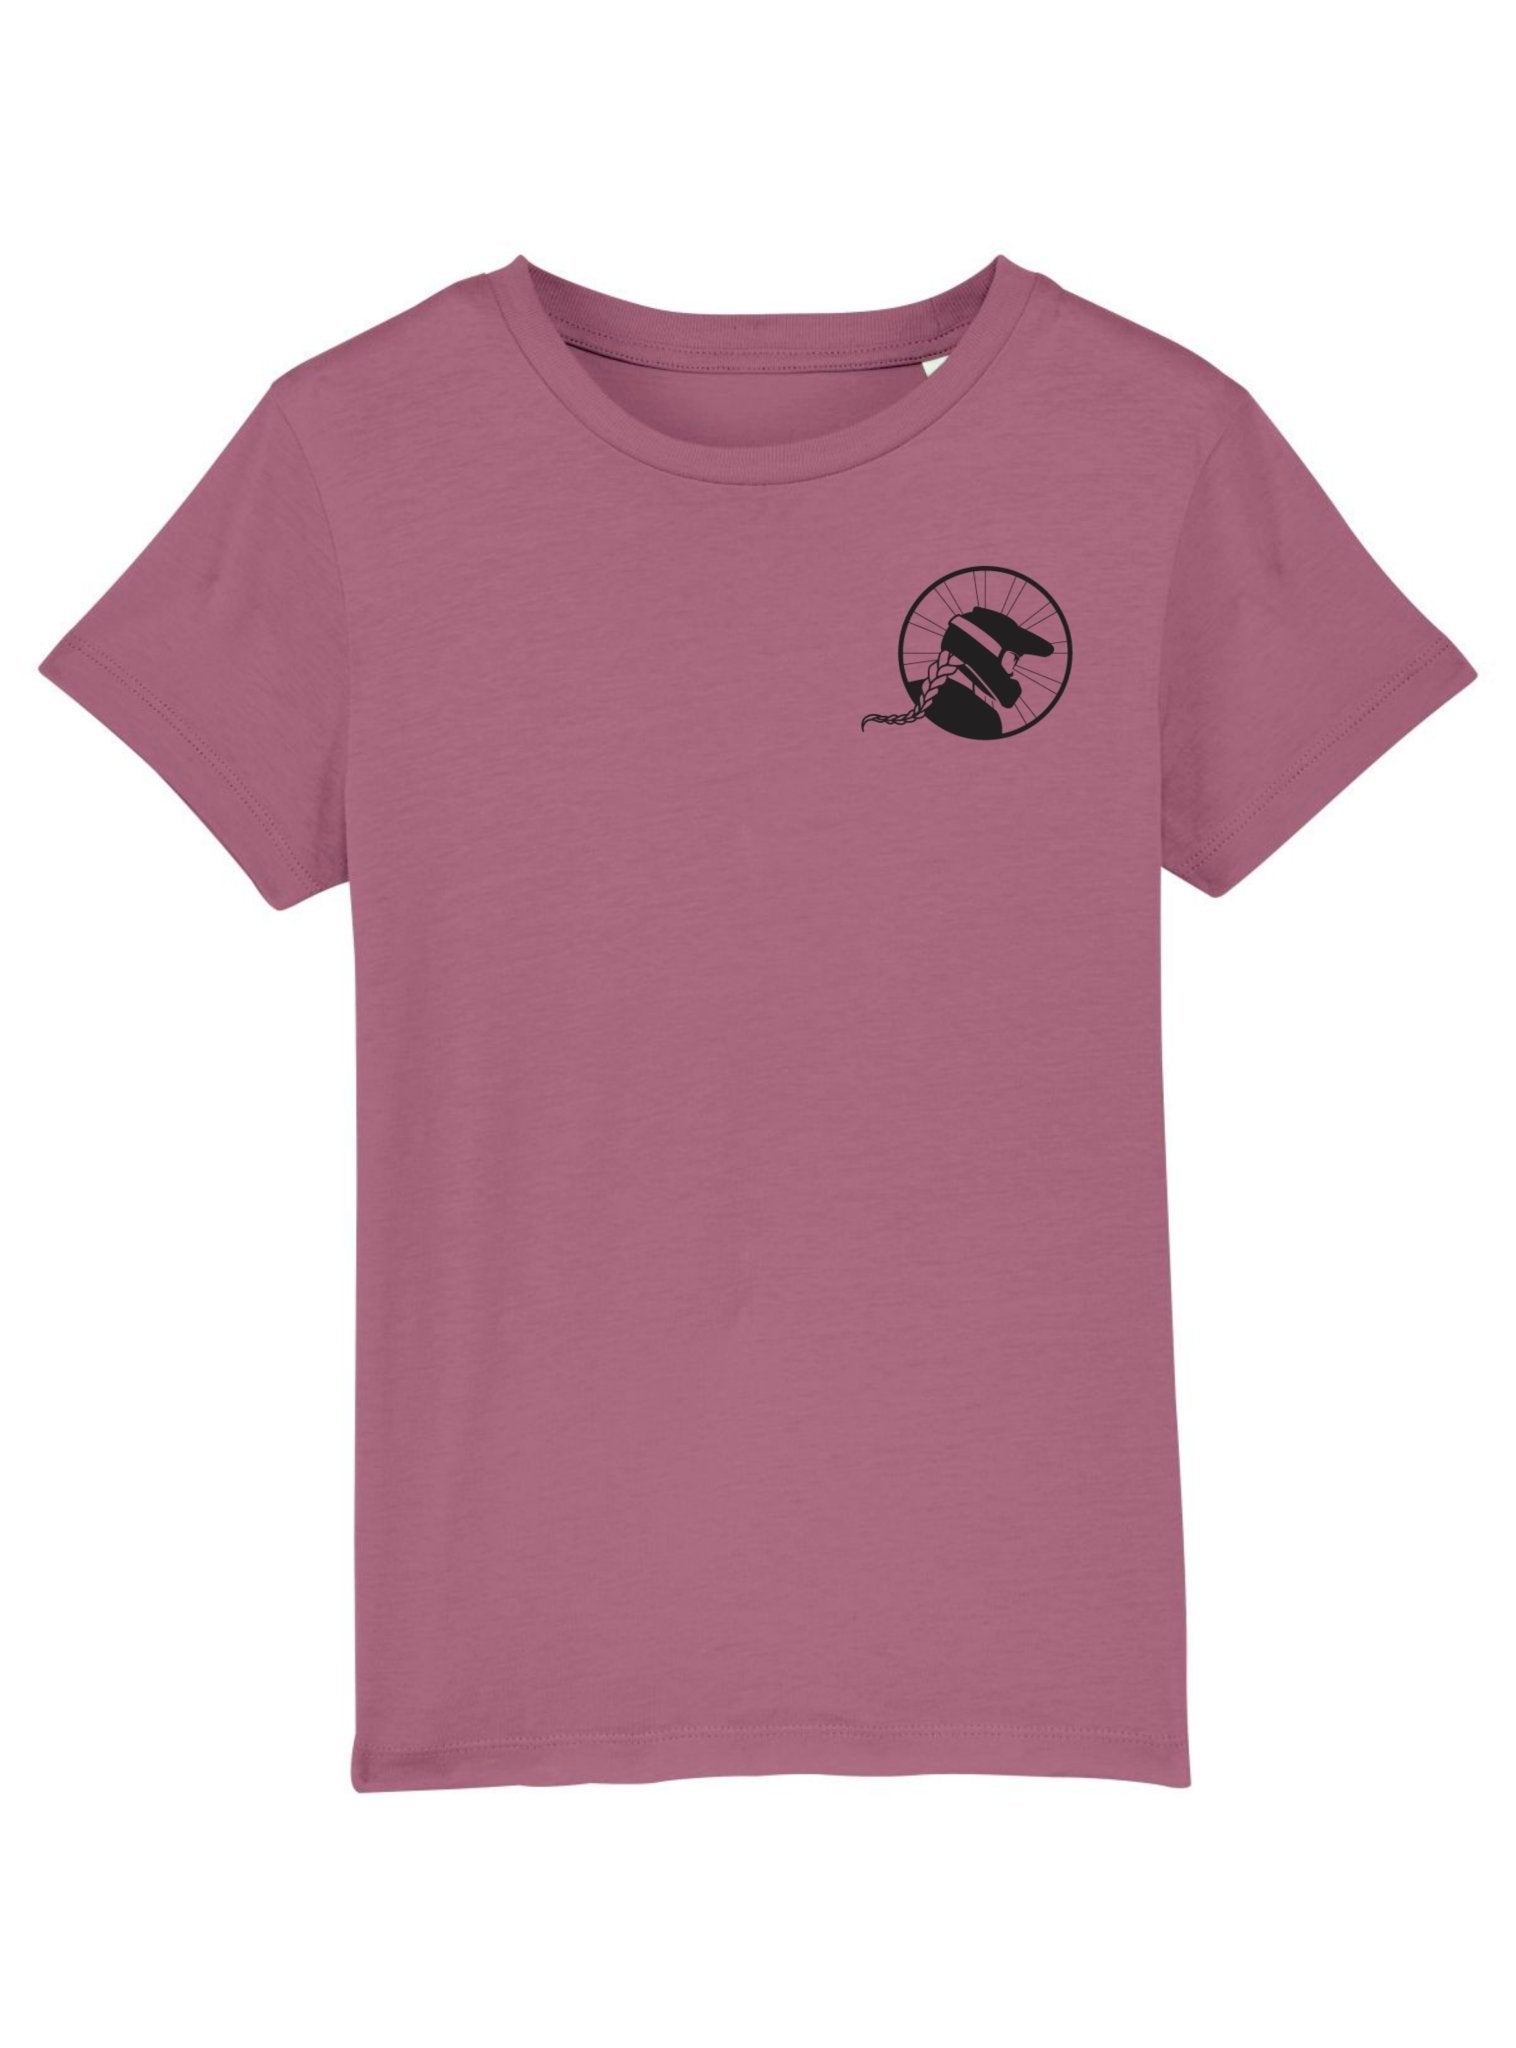 Shred Clothing | Droppin' In Youth Tee | Rose - Shred Like a Girl